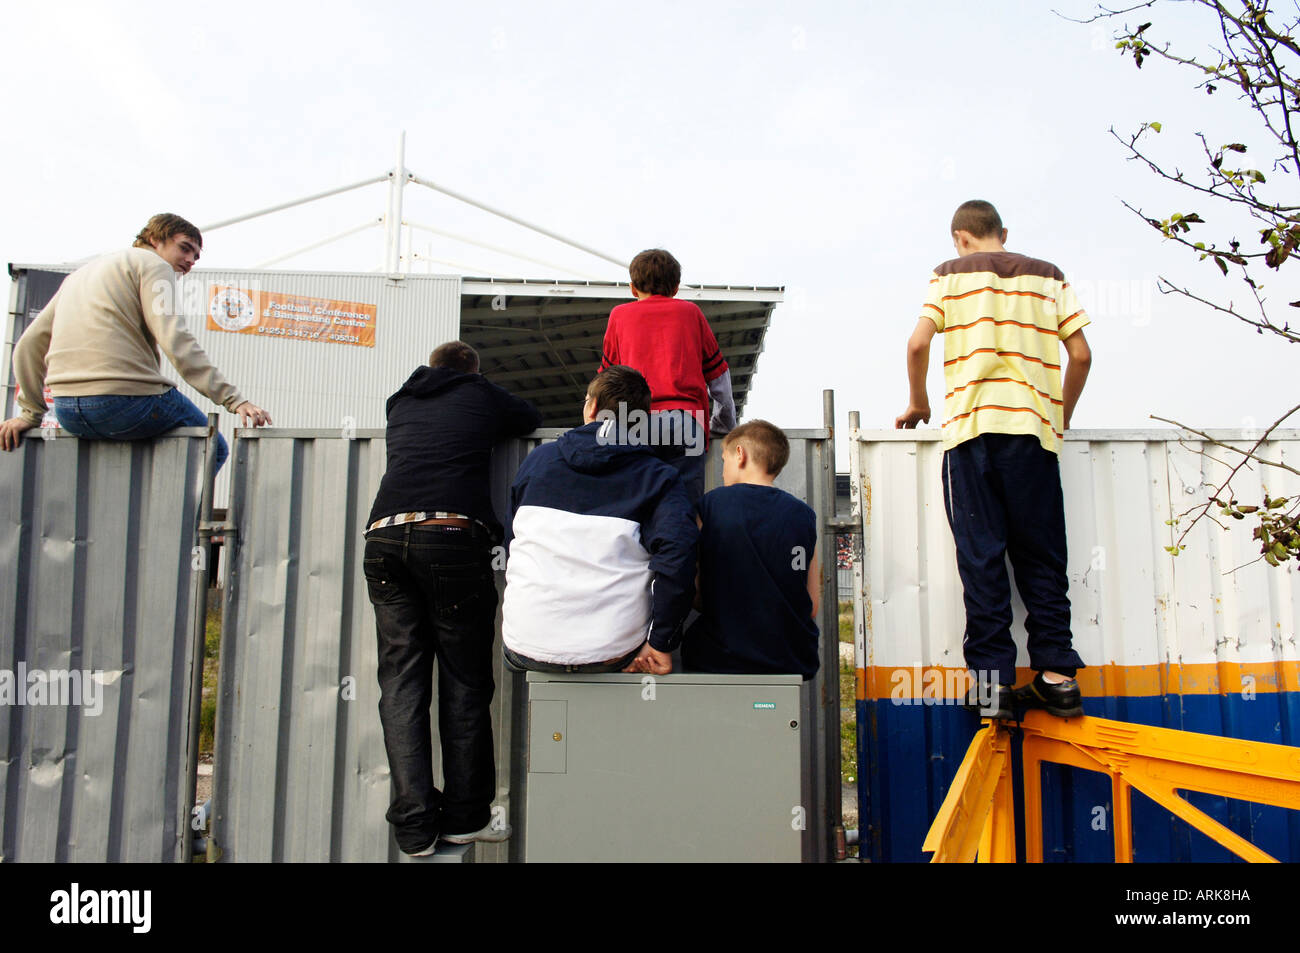 Group of young boys climb on a fence to watch a football game for free Stock Photo